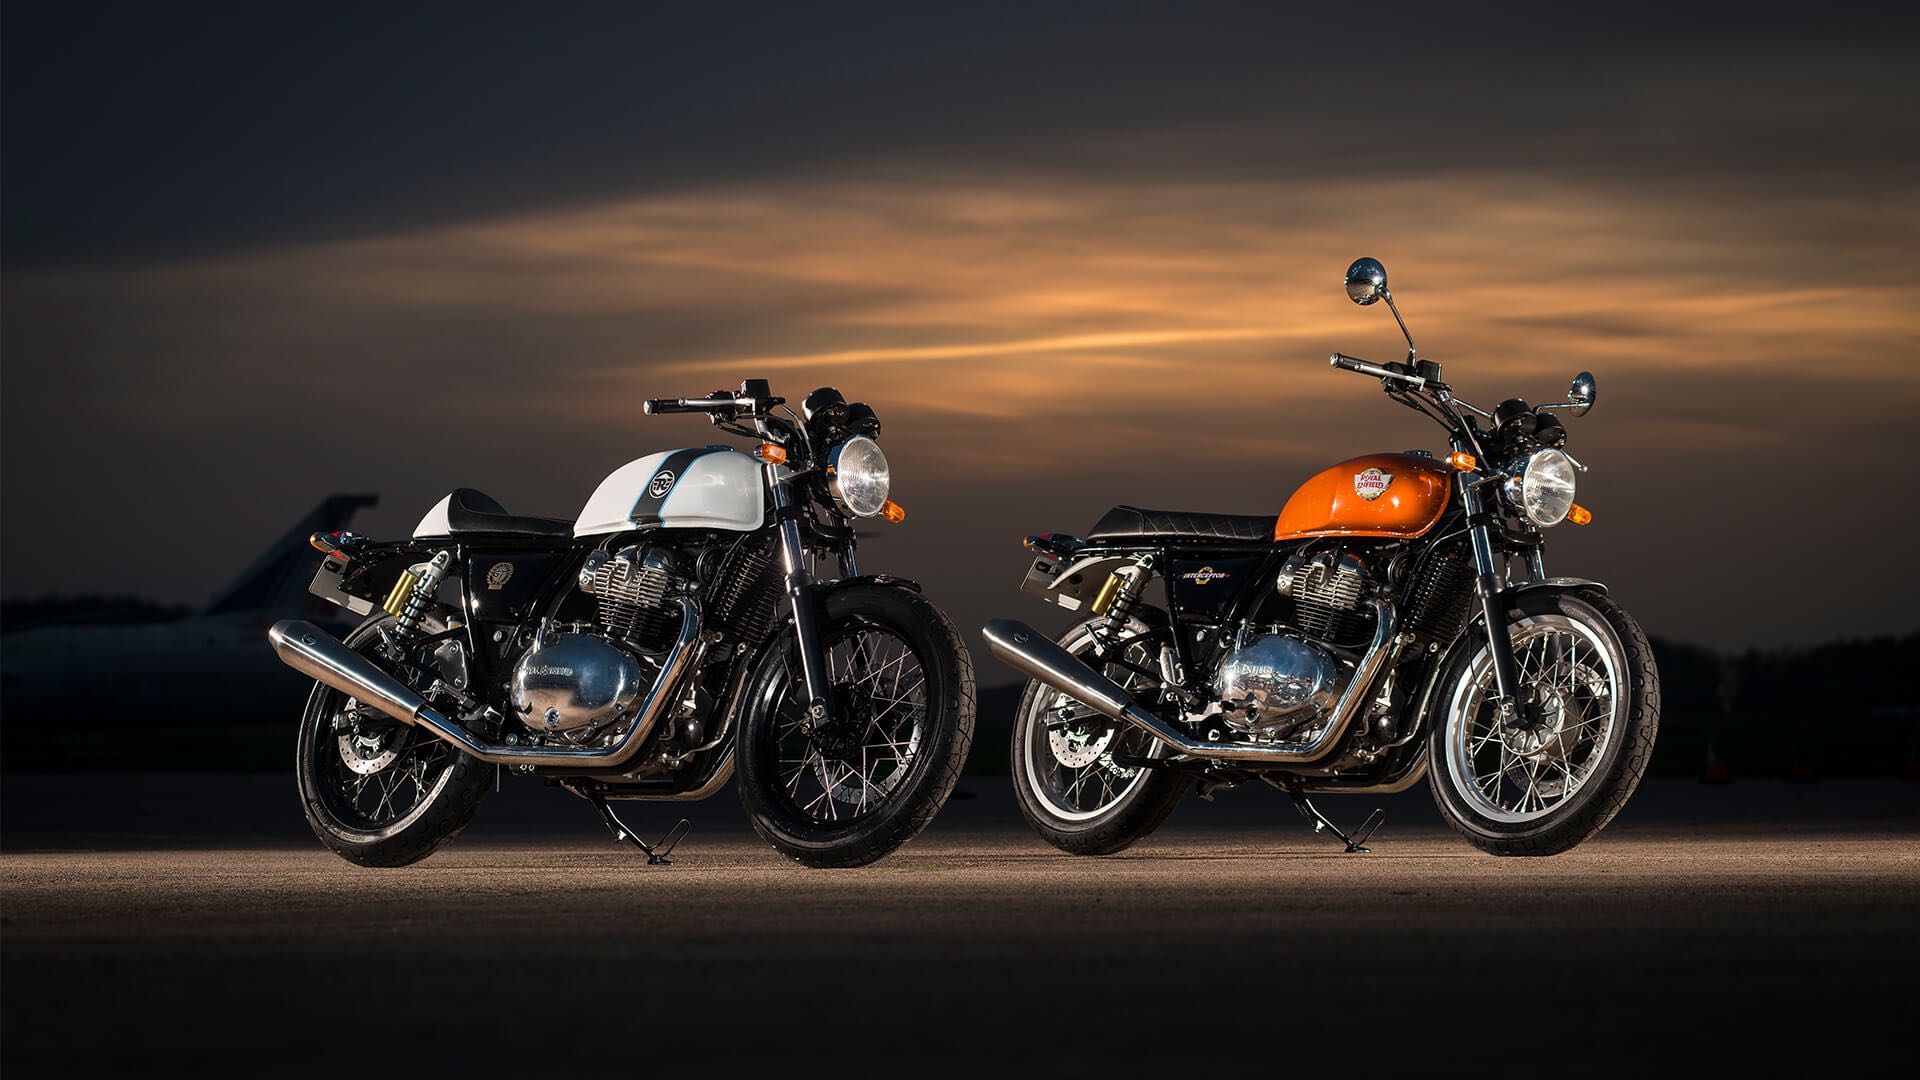 Royal Enfield launches the all new Interceptor INT 650 and Continental GT 650 Motorcycles